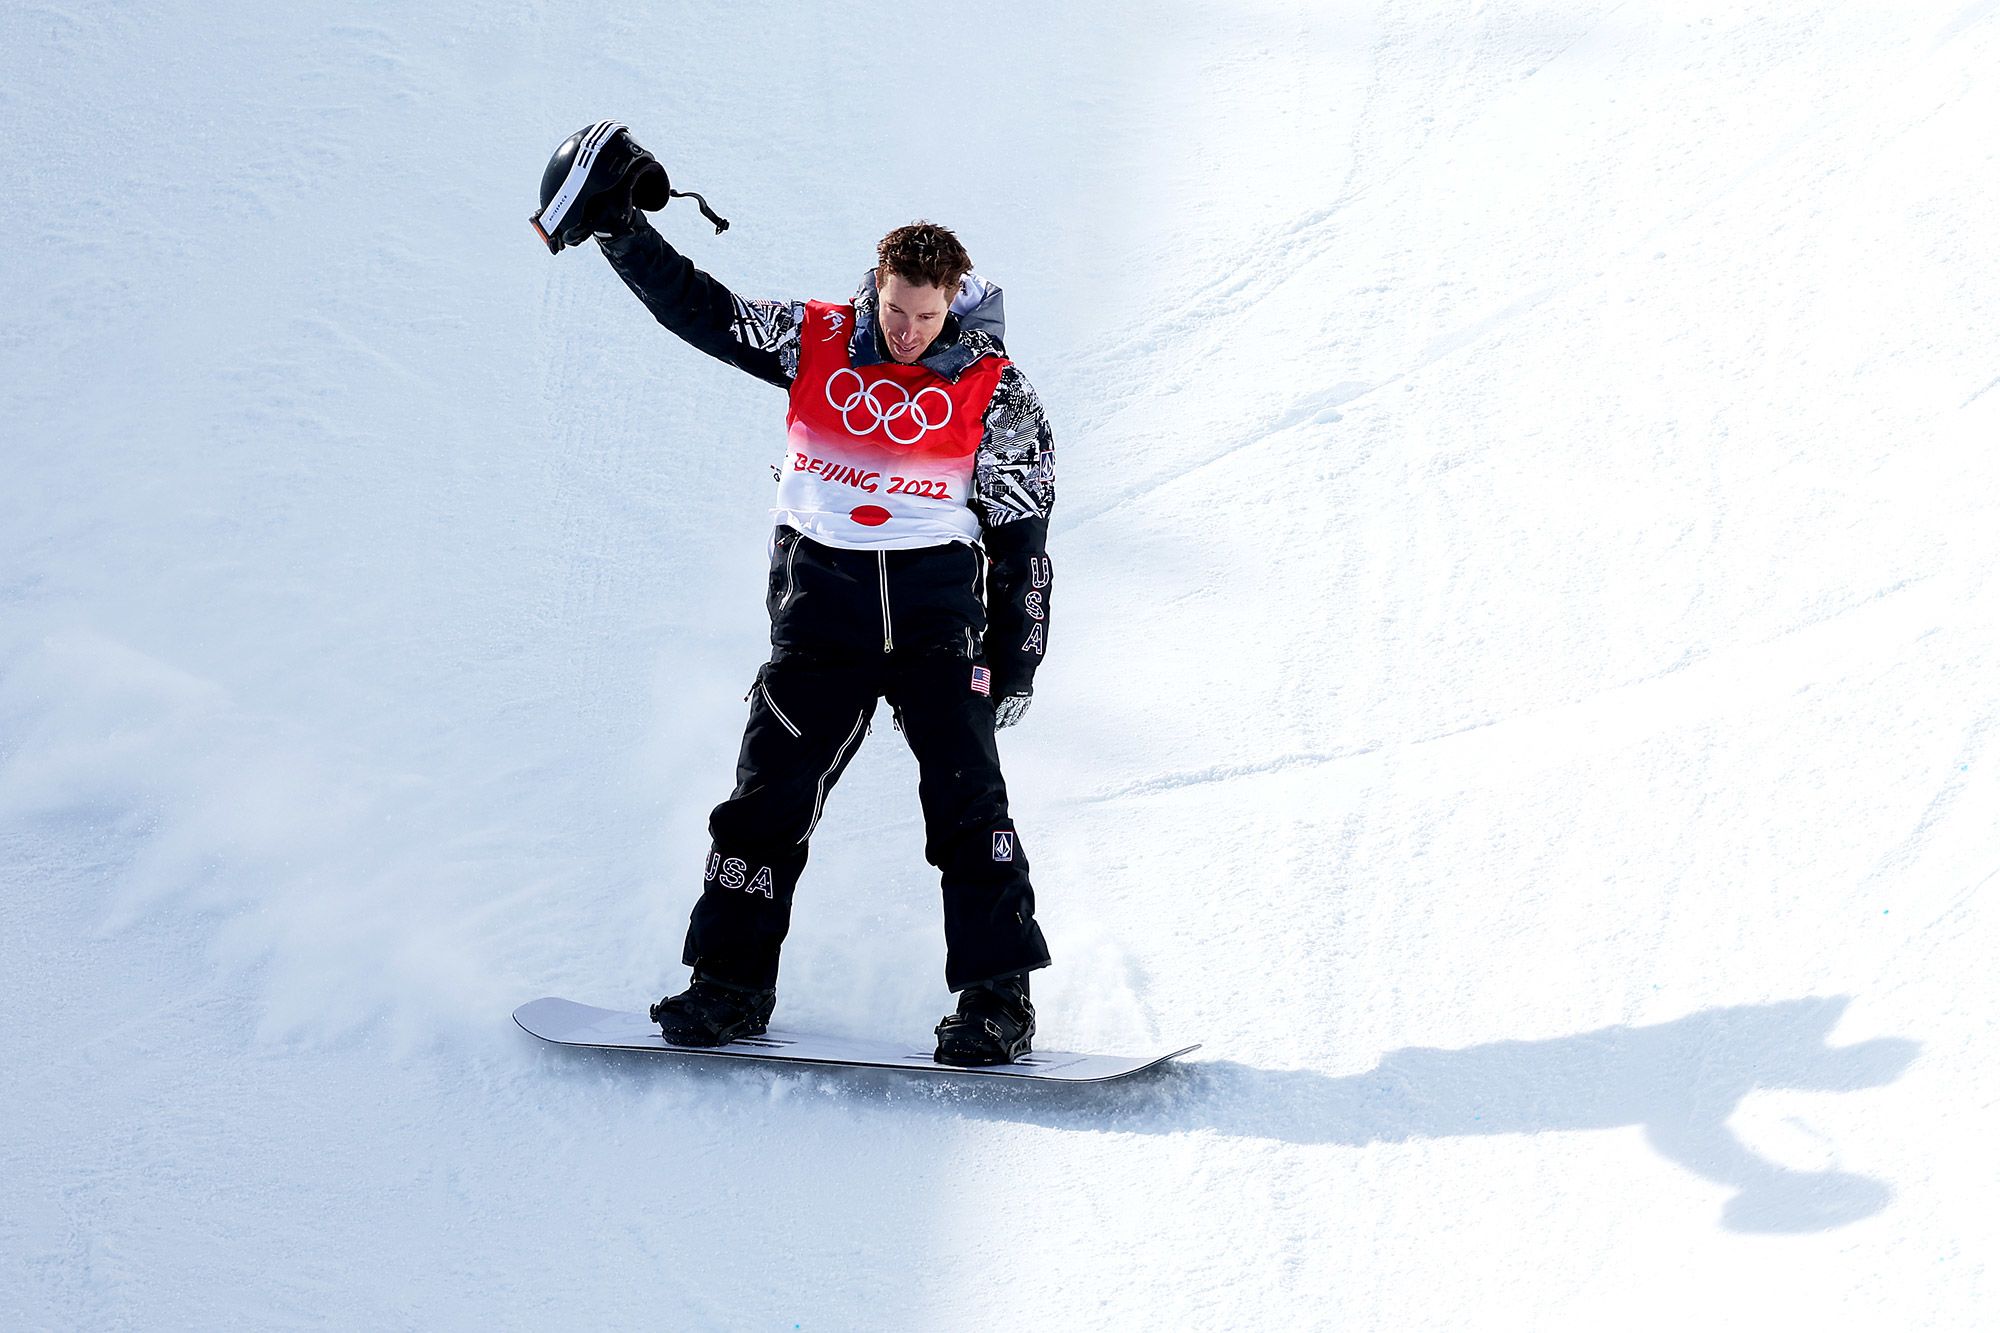 1,512 Shaun White Snowboarding Photos & High Res Pictures - Getty Images